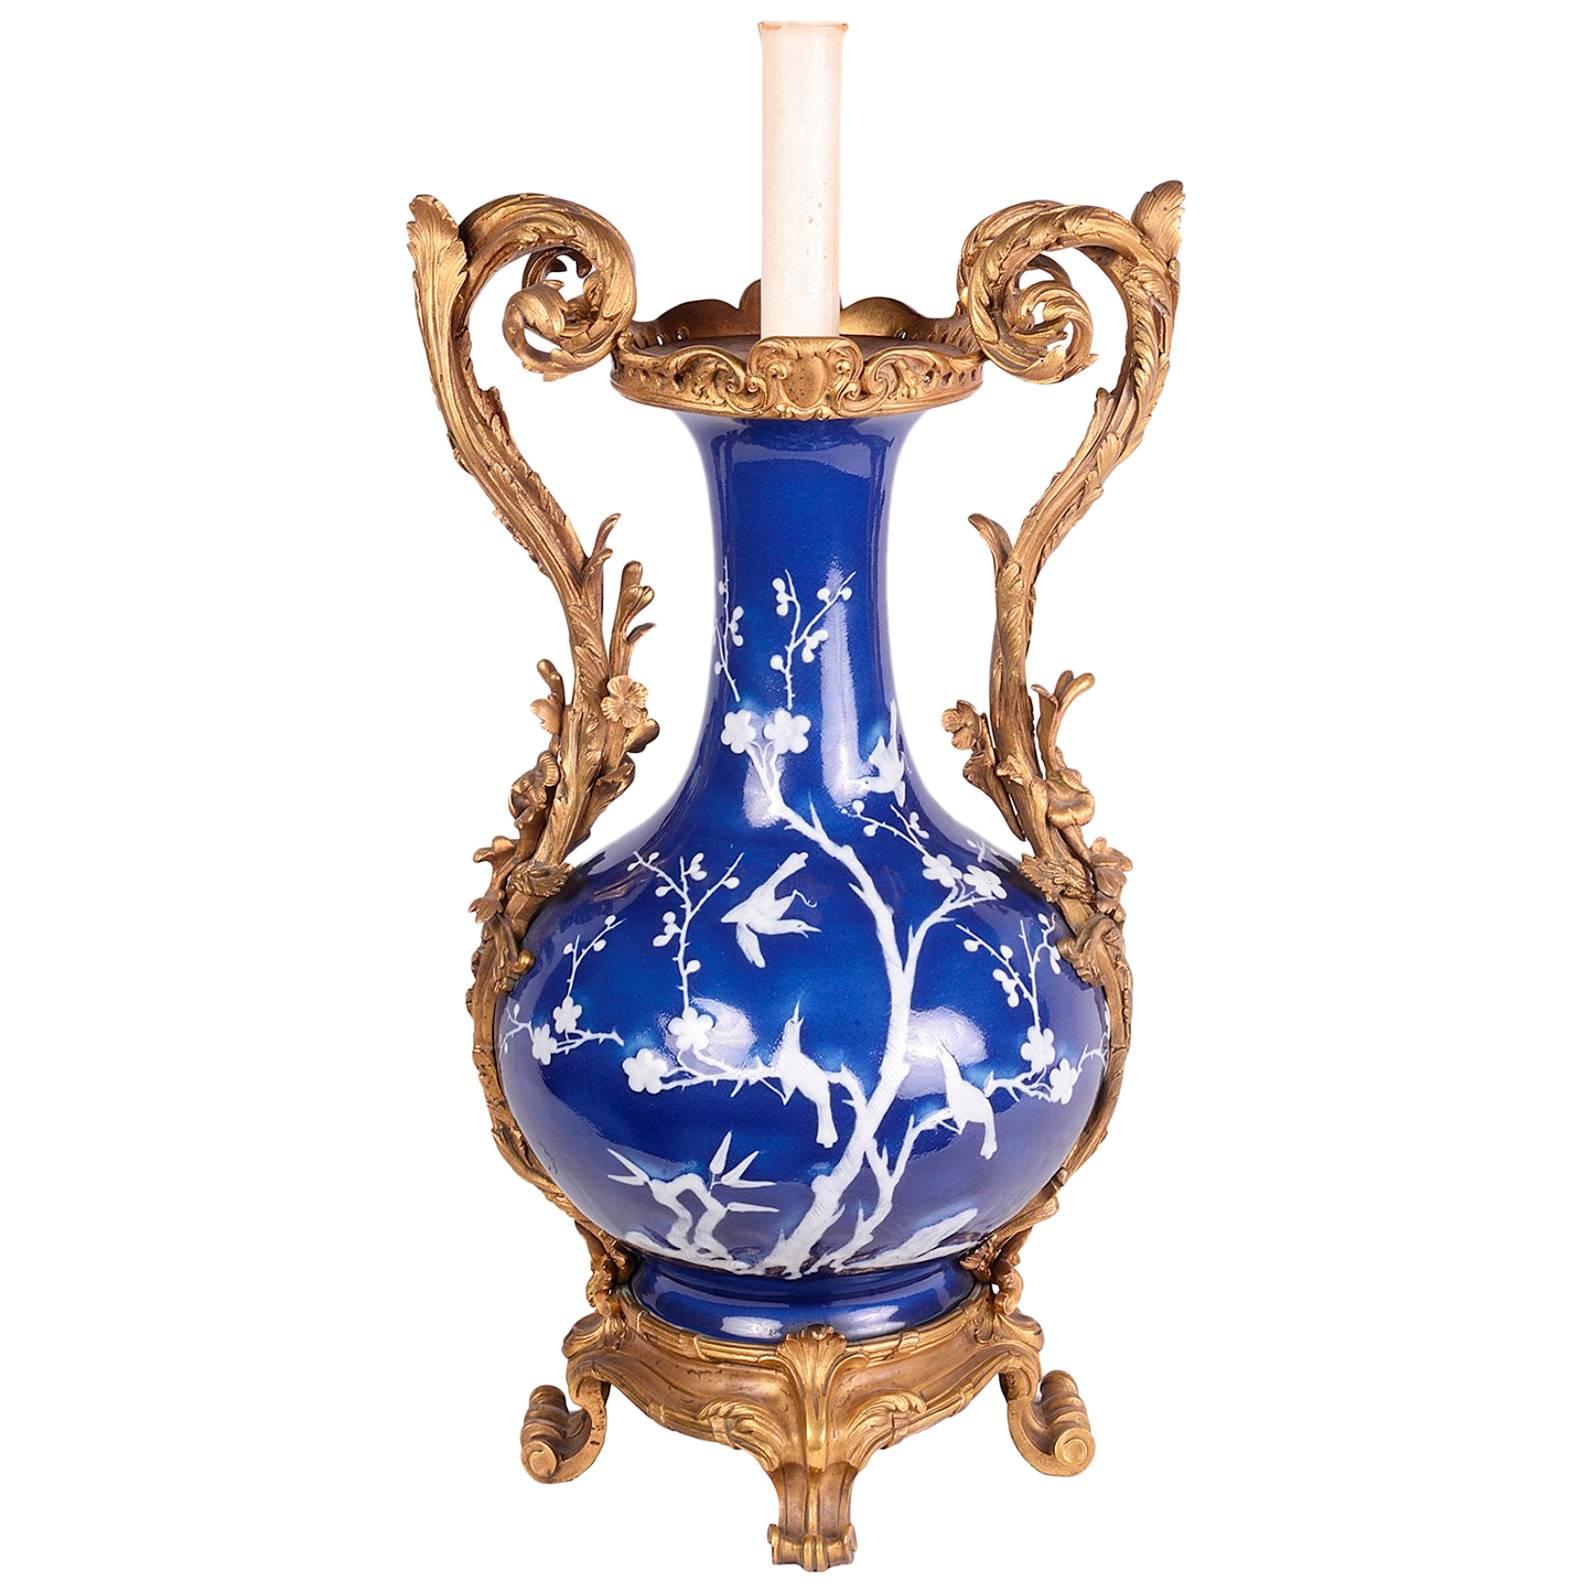 A striking Chinese Blue and White vase, having French scrolling foliate ormolu mounts and handles.
Converted to a lamp.